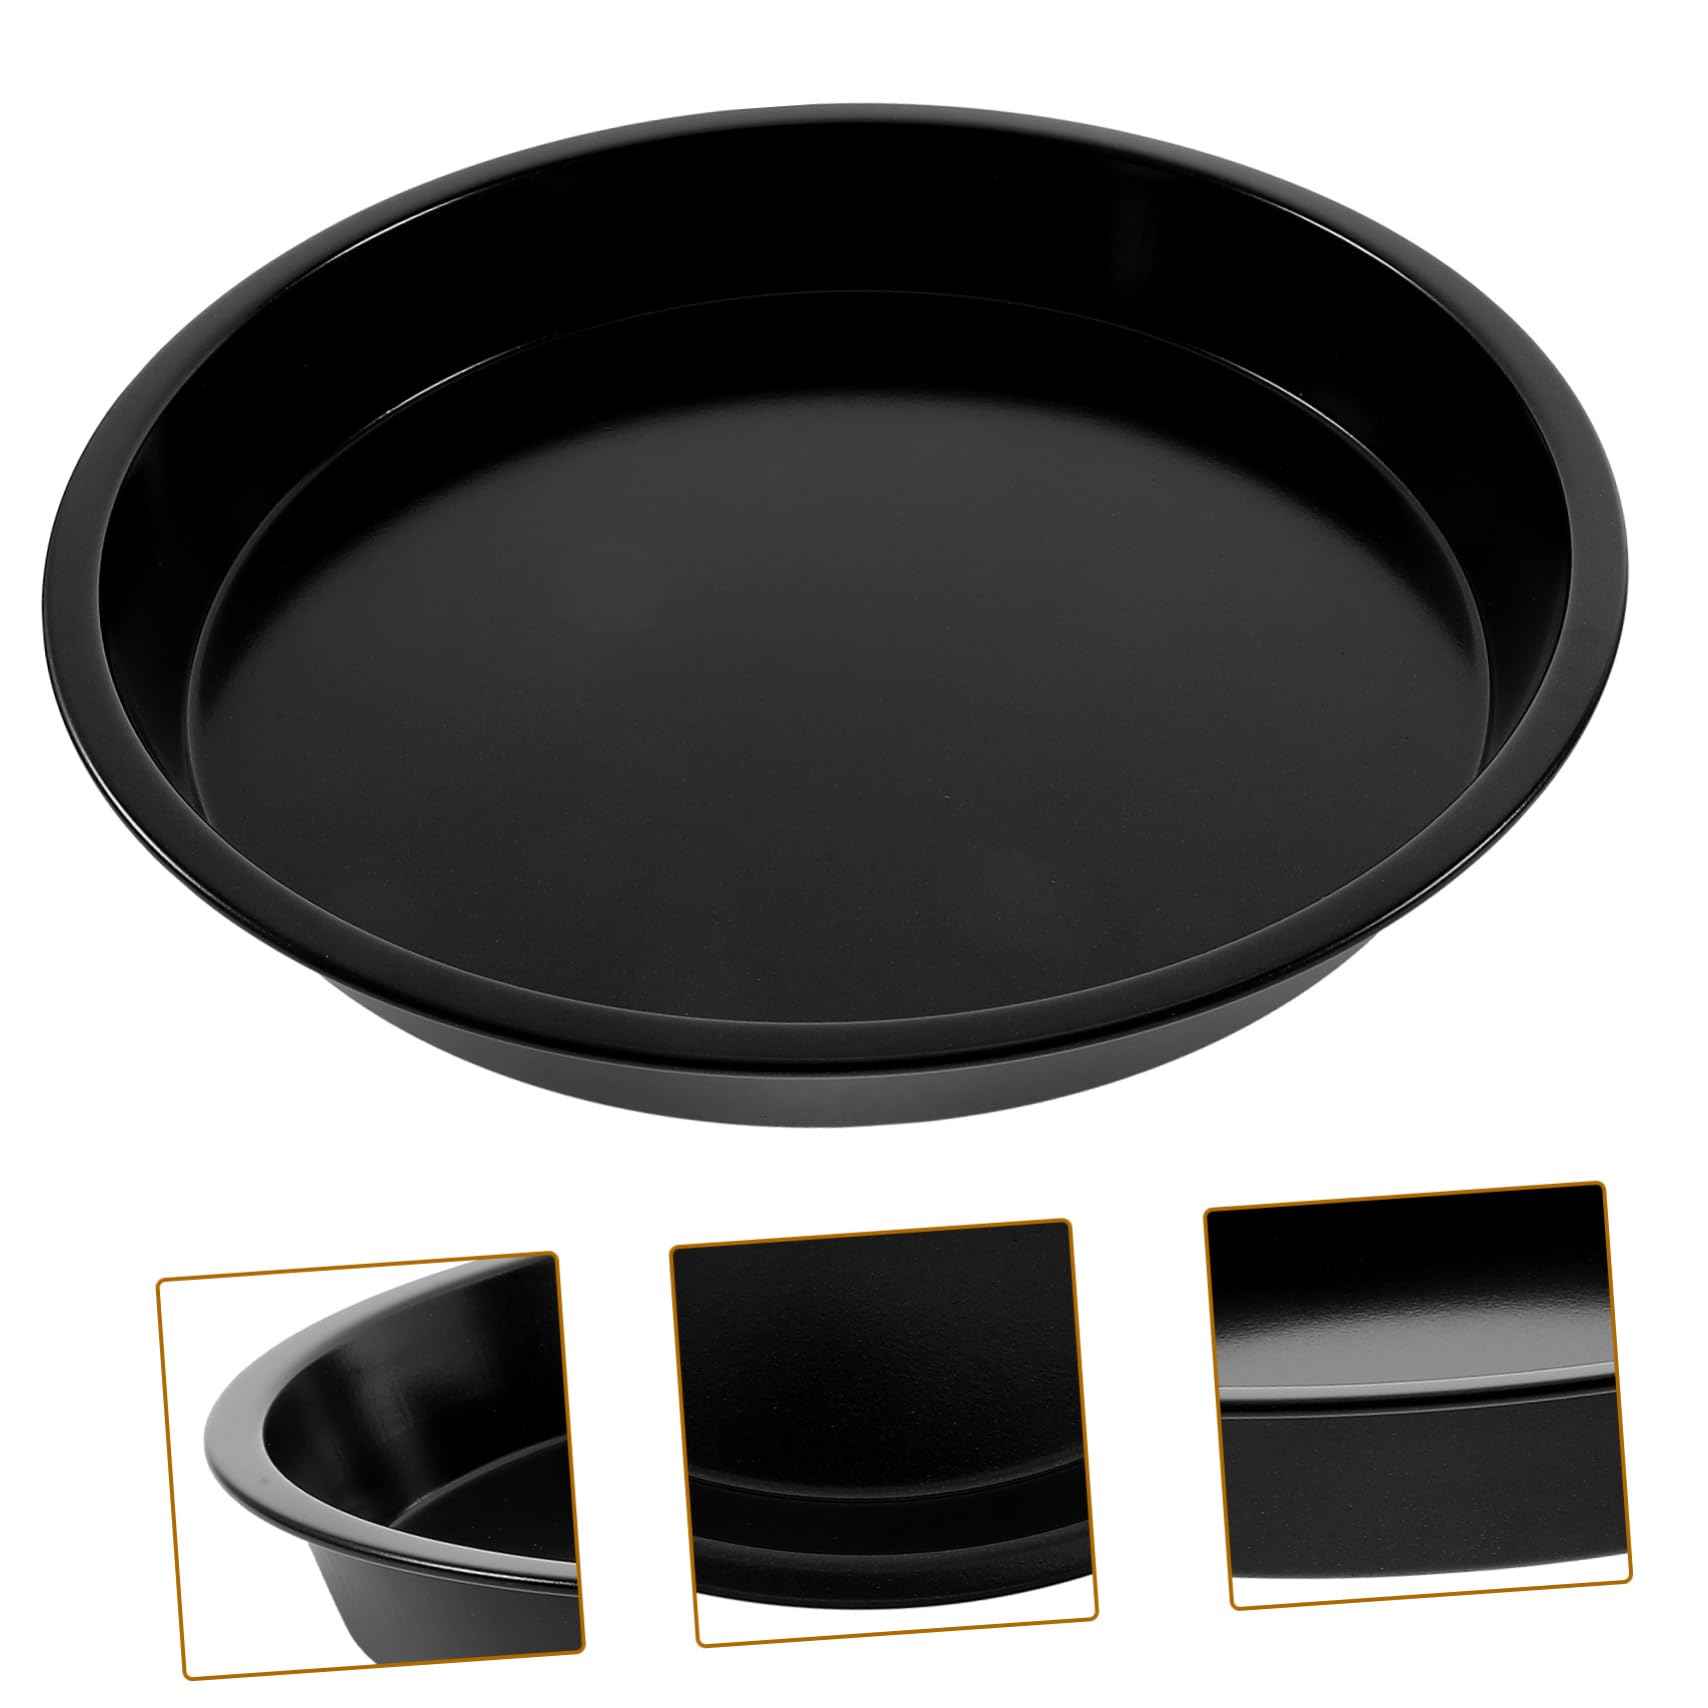 SHOWERORO Steel Cake Tray Pizza Pans Microwave Pizza Pan Pie Baking Tray 8 Inch Cake Pans Pizza Round Plate Crisper Pan Nonstick Bakeware Seafood Grill Pan Carbon Steel Oven Baking Pan